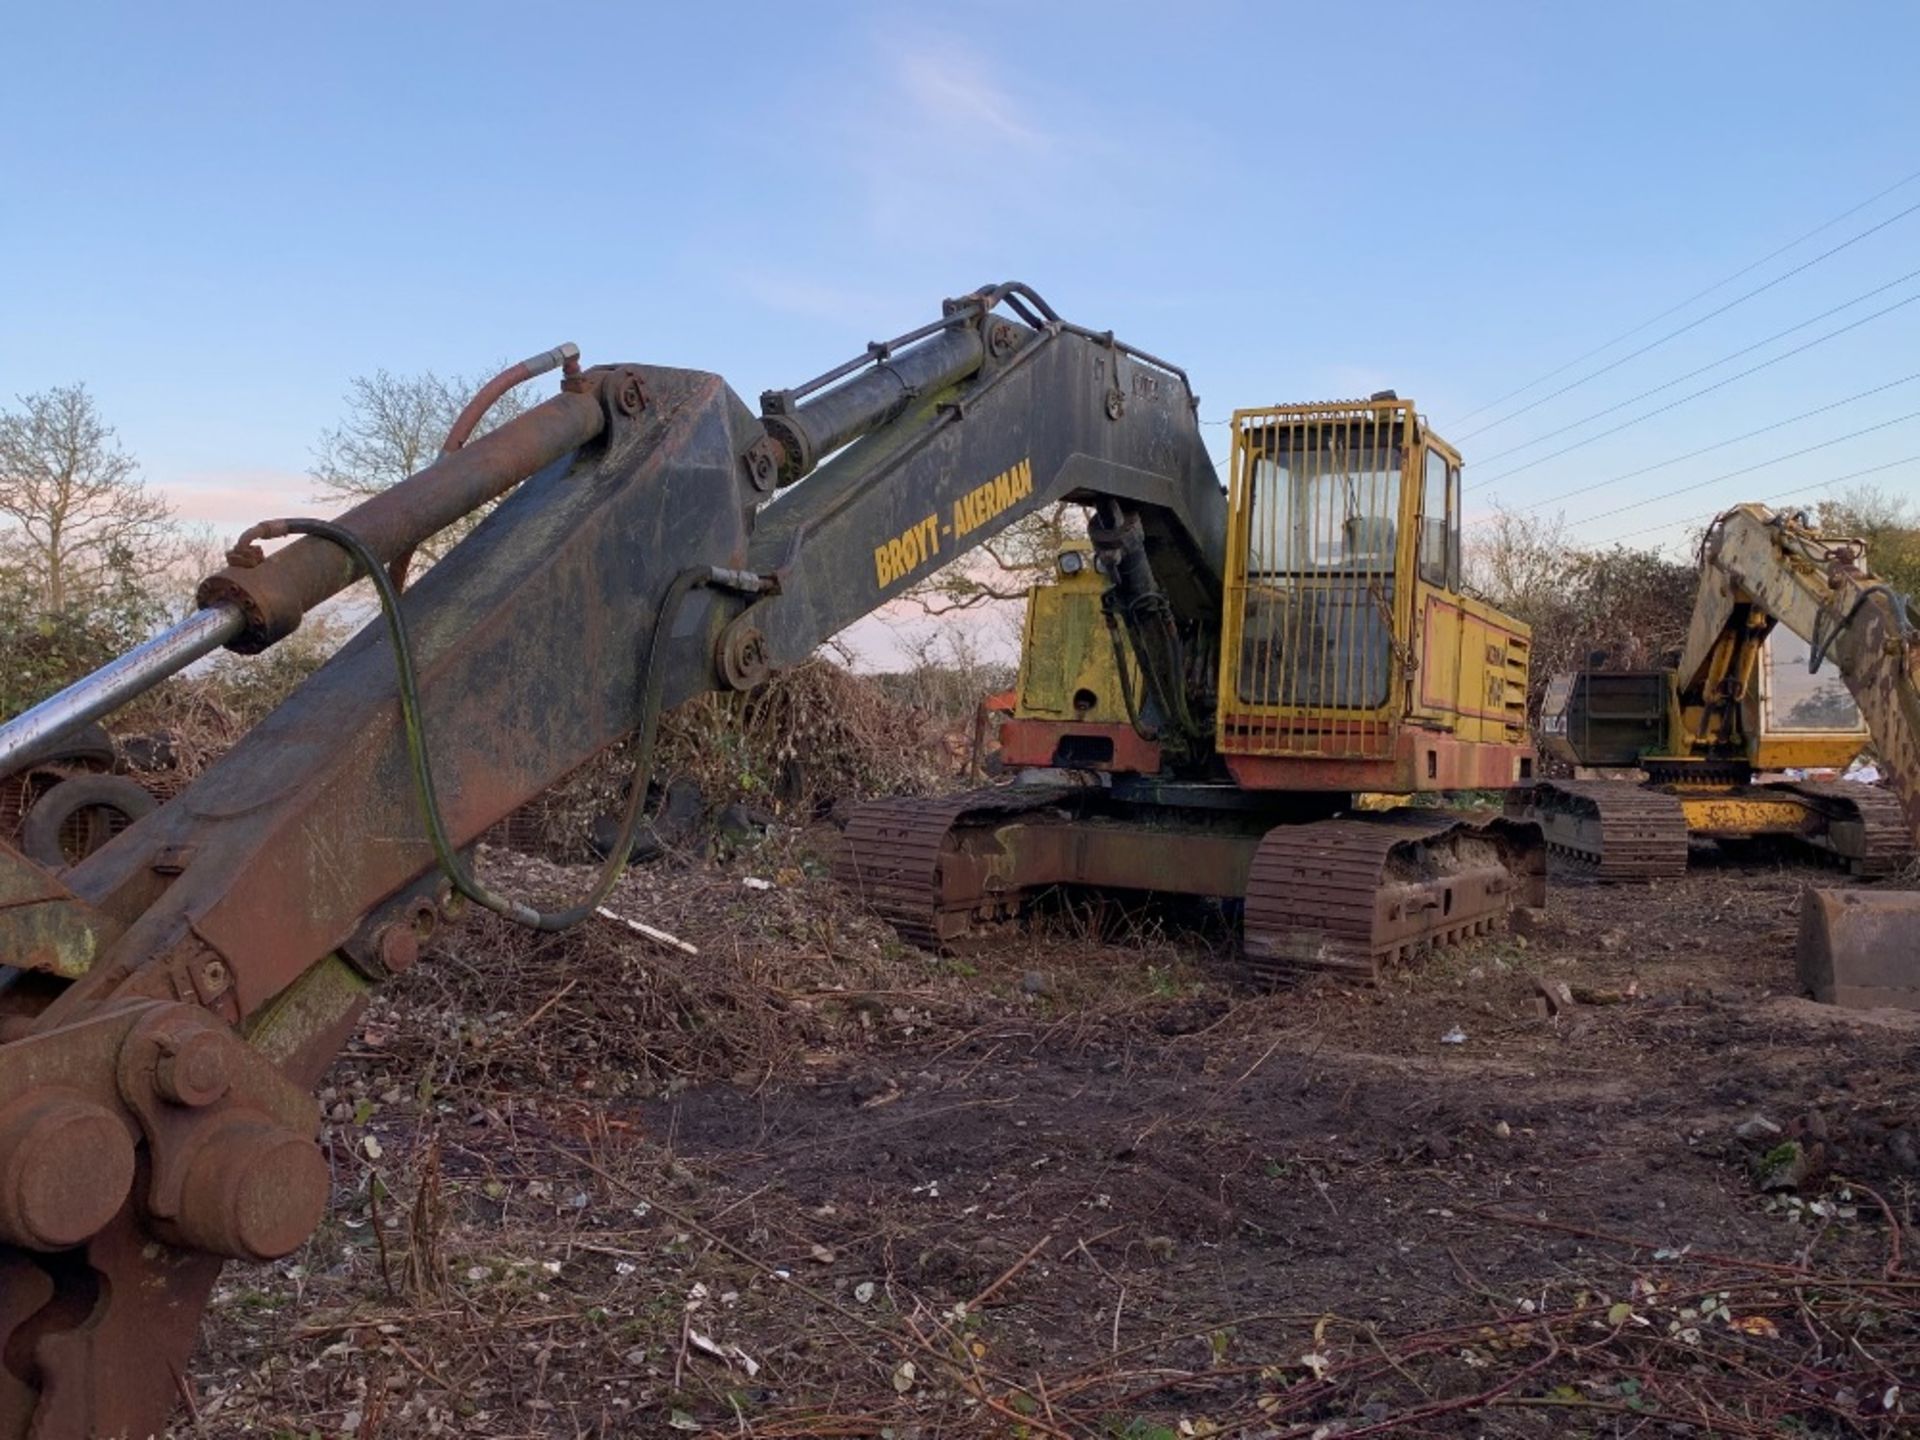 Akerman H14B tracked digger/excavator with bucket and horned concrete breaker/crusher - runs,